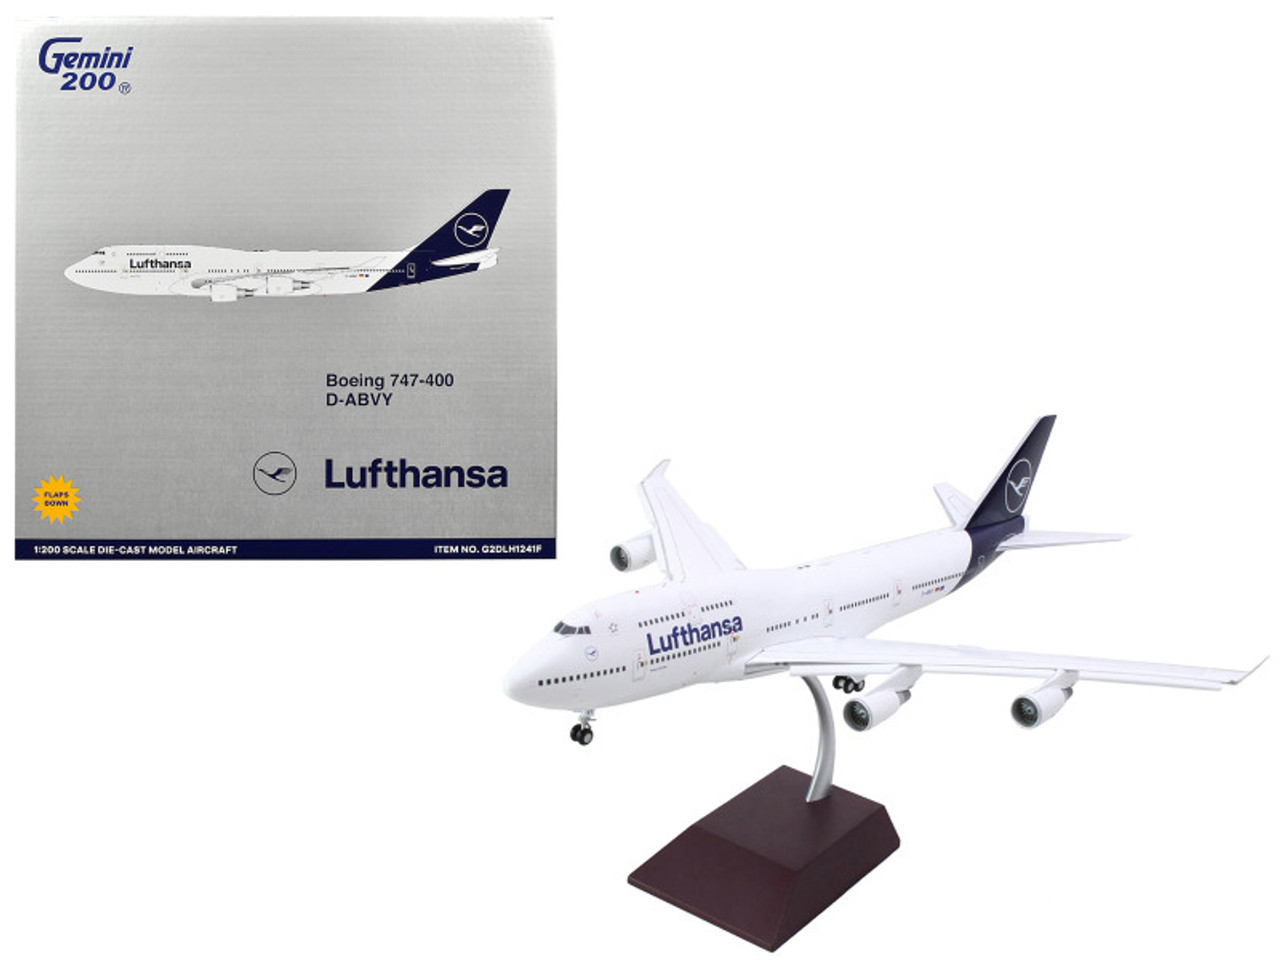 Boeing 747-400 Commercial Aircraft with Flaps Down "Lufthansa" (D-ABVY) White with Dark Blue Tail "Gemini 200" Series 1/200 Diecast Model Airplane by GeminiJets